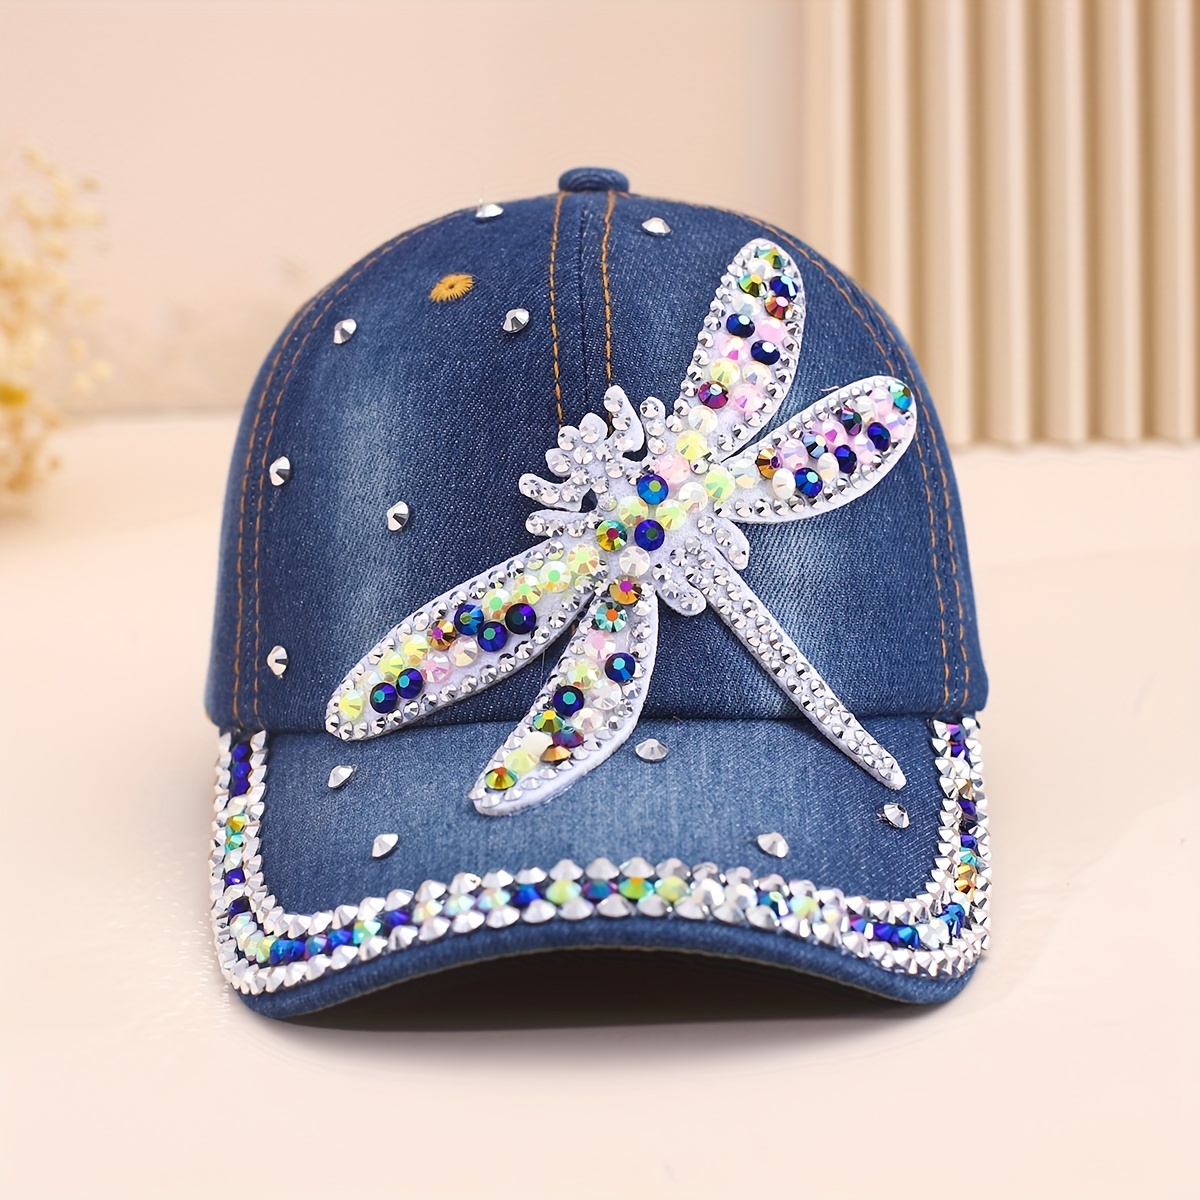 

Rhinestone Dragonfly Patch Baseball Cap Blue Denim Washed Distressed Y2k Dad Hats Lightweight Adjustable Sun Hat For Women Daily Use